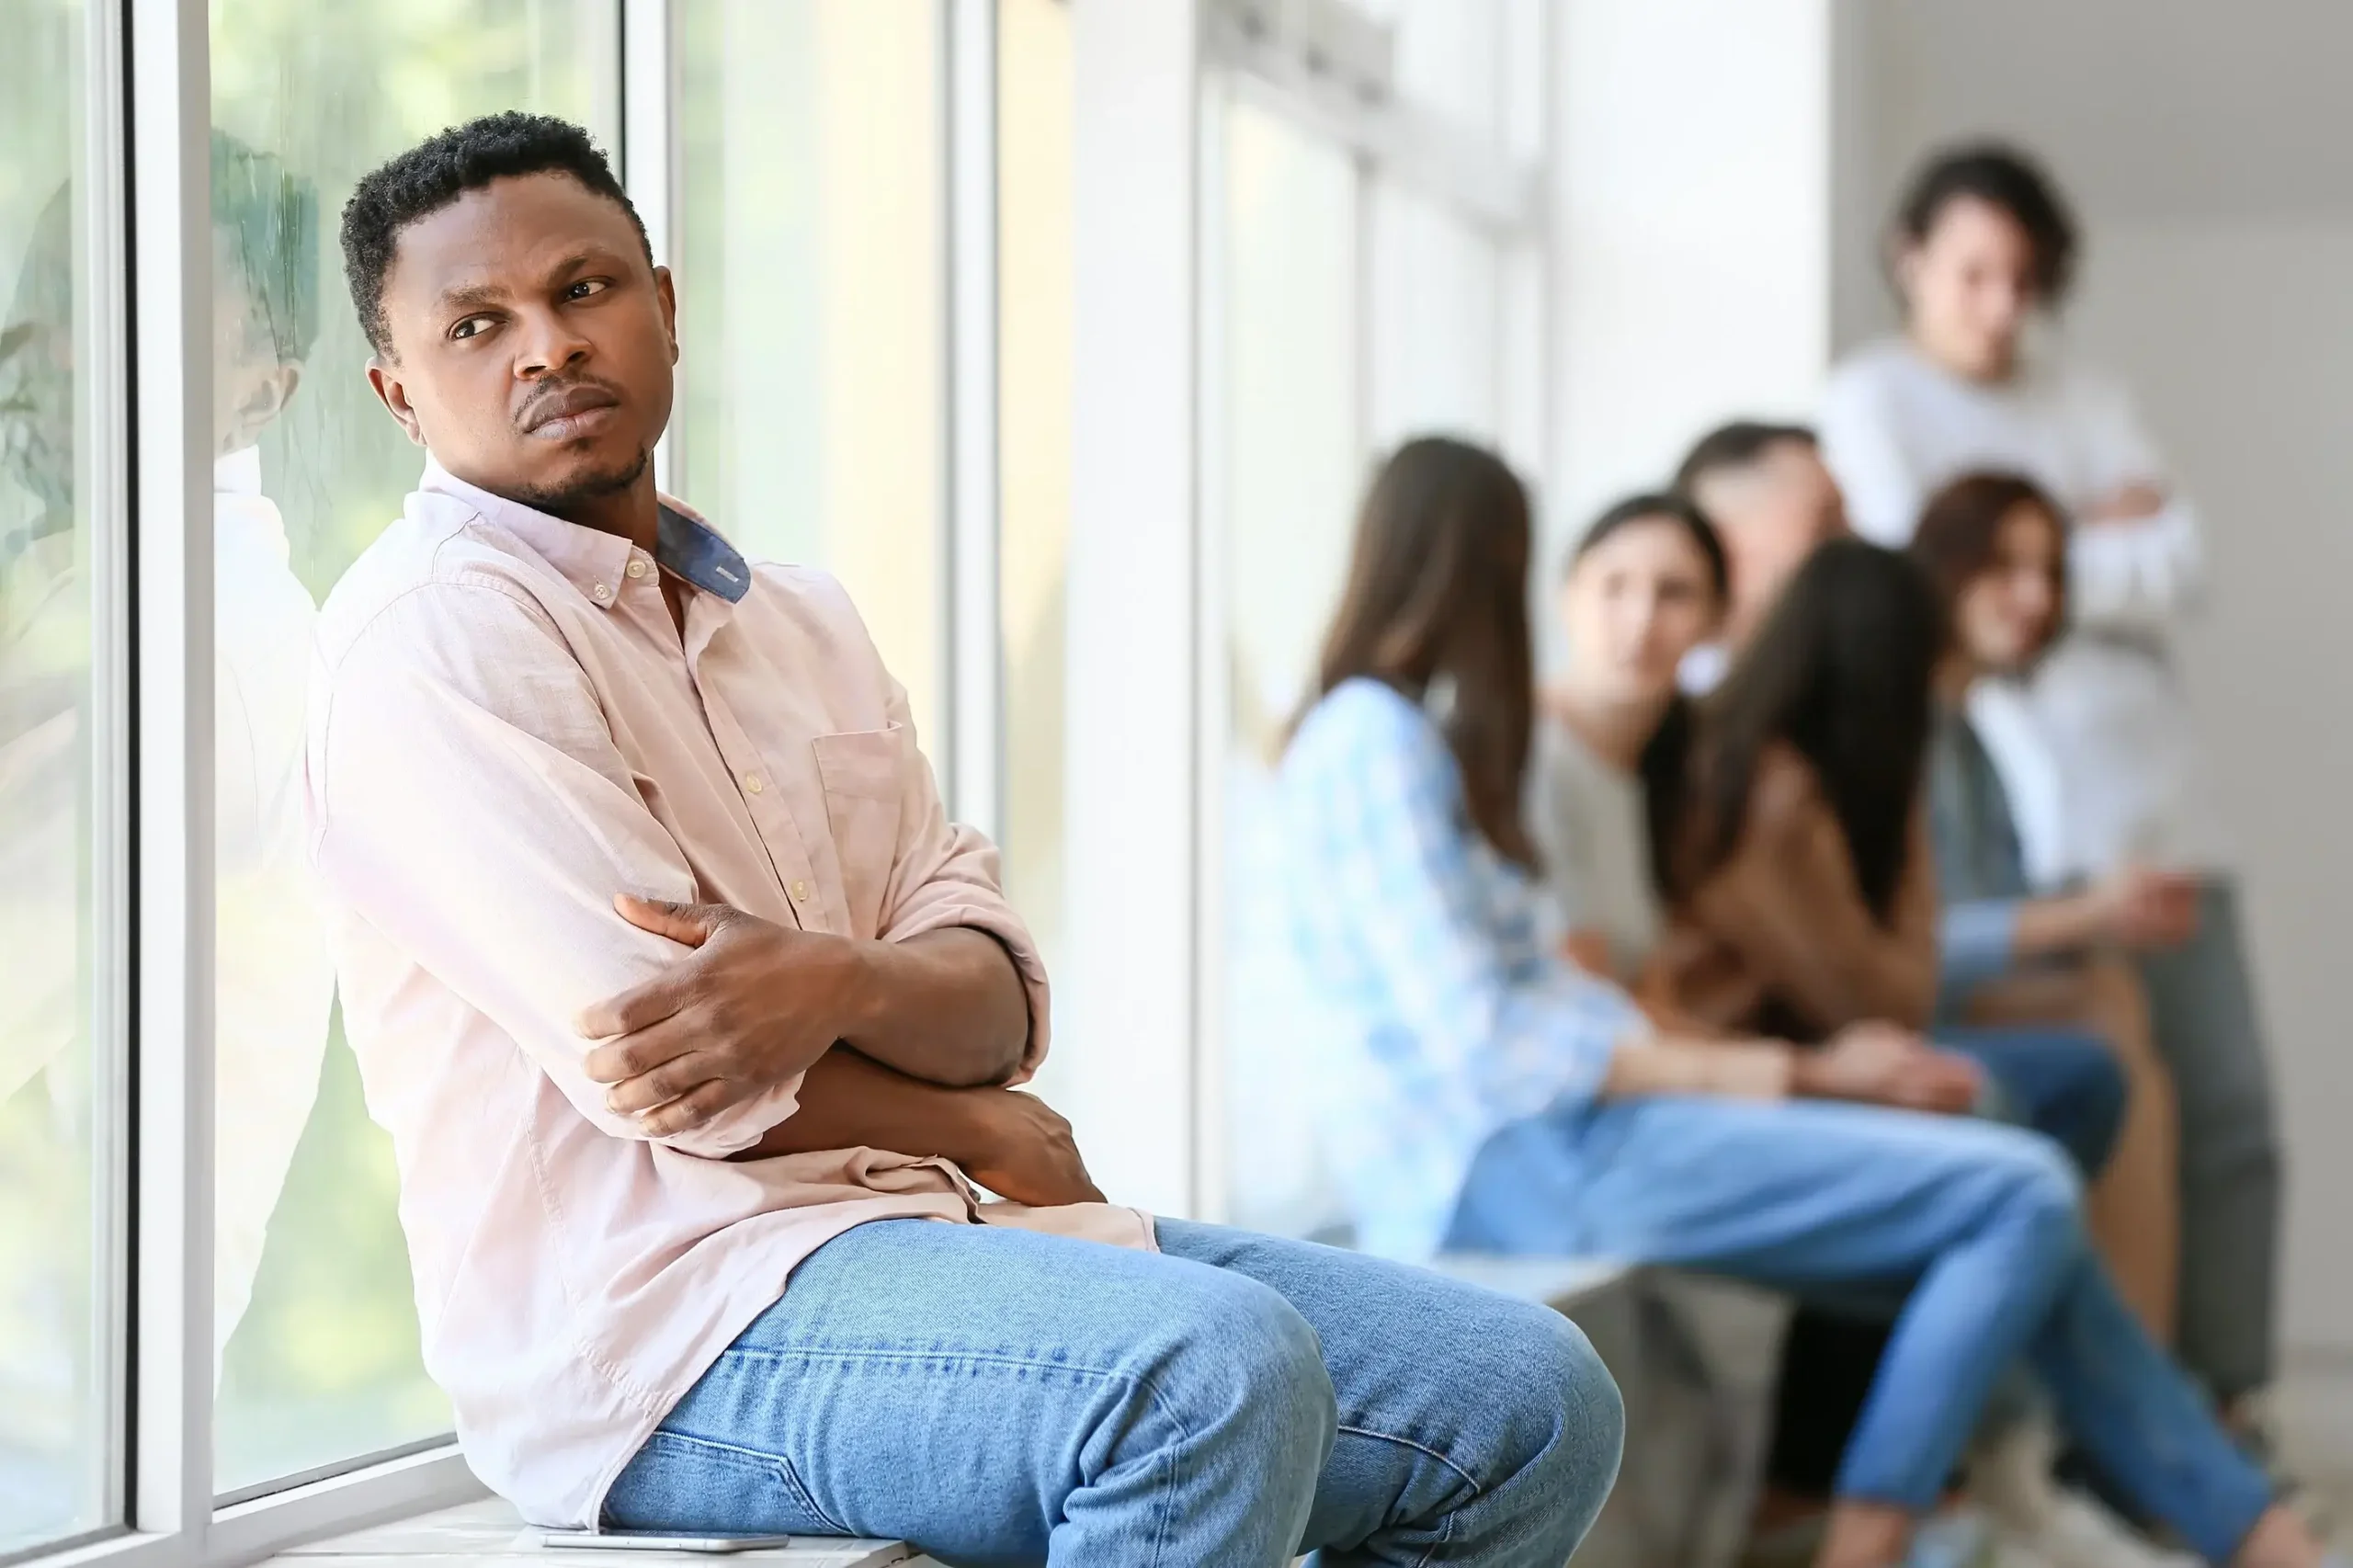 A black man sitting away from coworkers as an outcast.